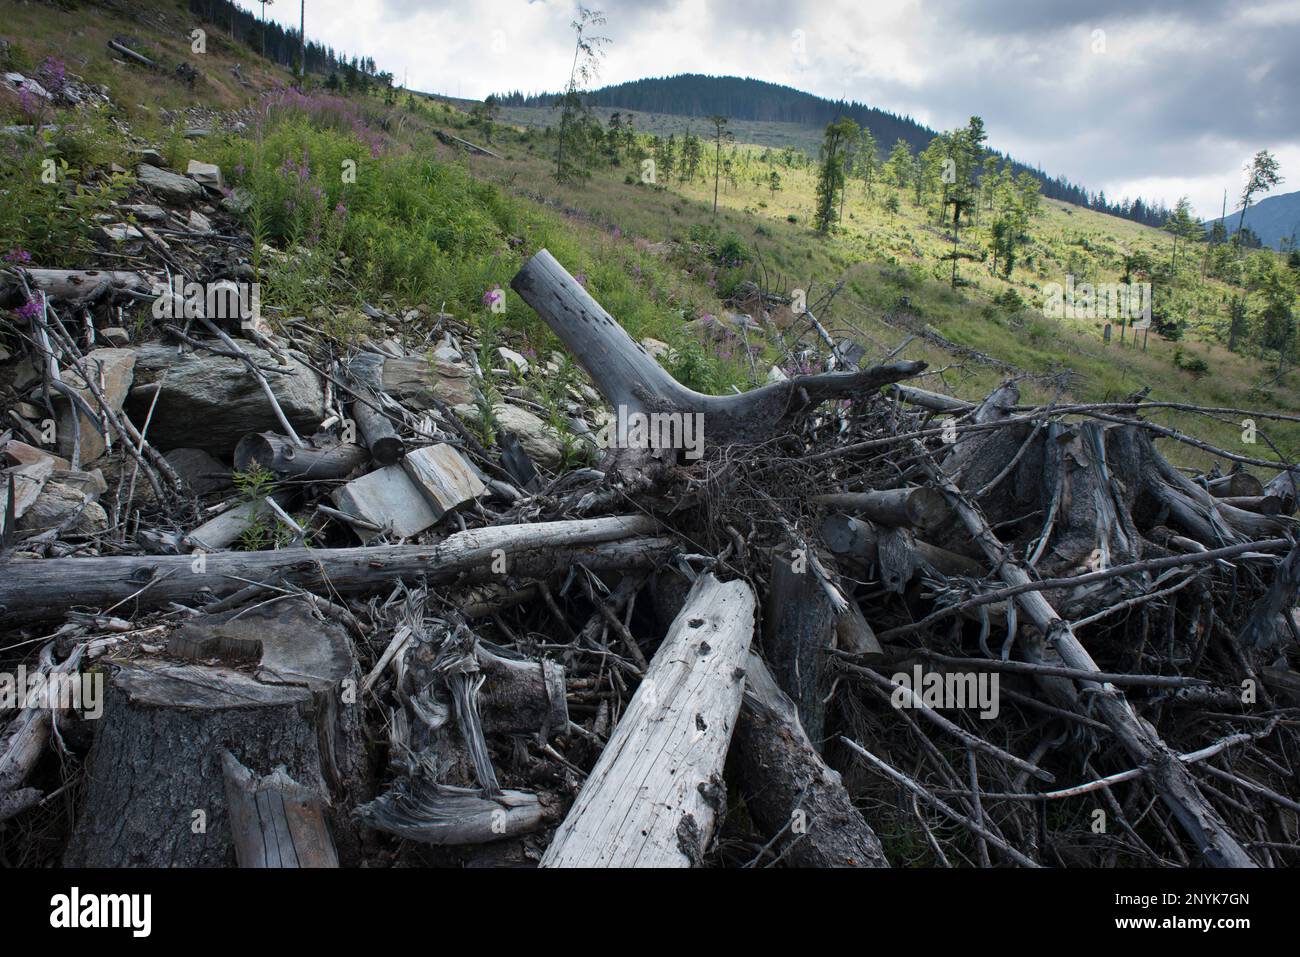 Fagaras Natura 2000 Site, Romania - July 2016: Ancient forest and logging in the southern Carpathians. Stock Photo